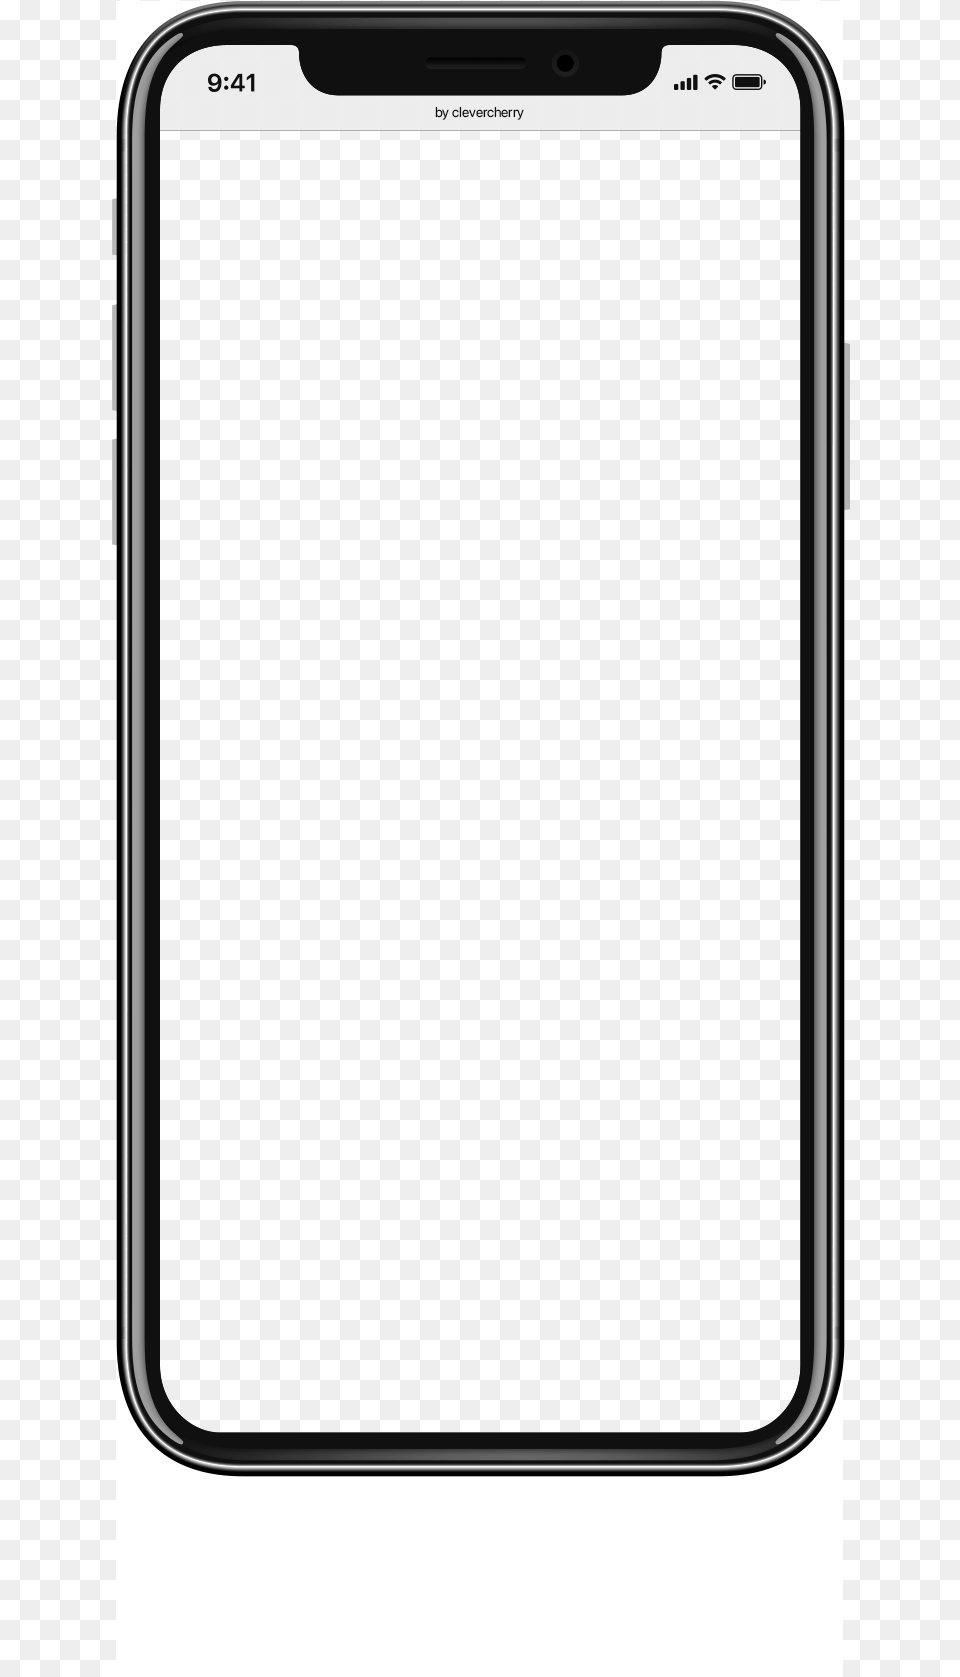 Iphone X 2018 10 23 Download Full Art Pokemon Cards Template, Electronics, Mobile Phone, Phone Free Transparent Png